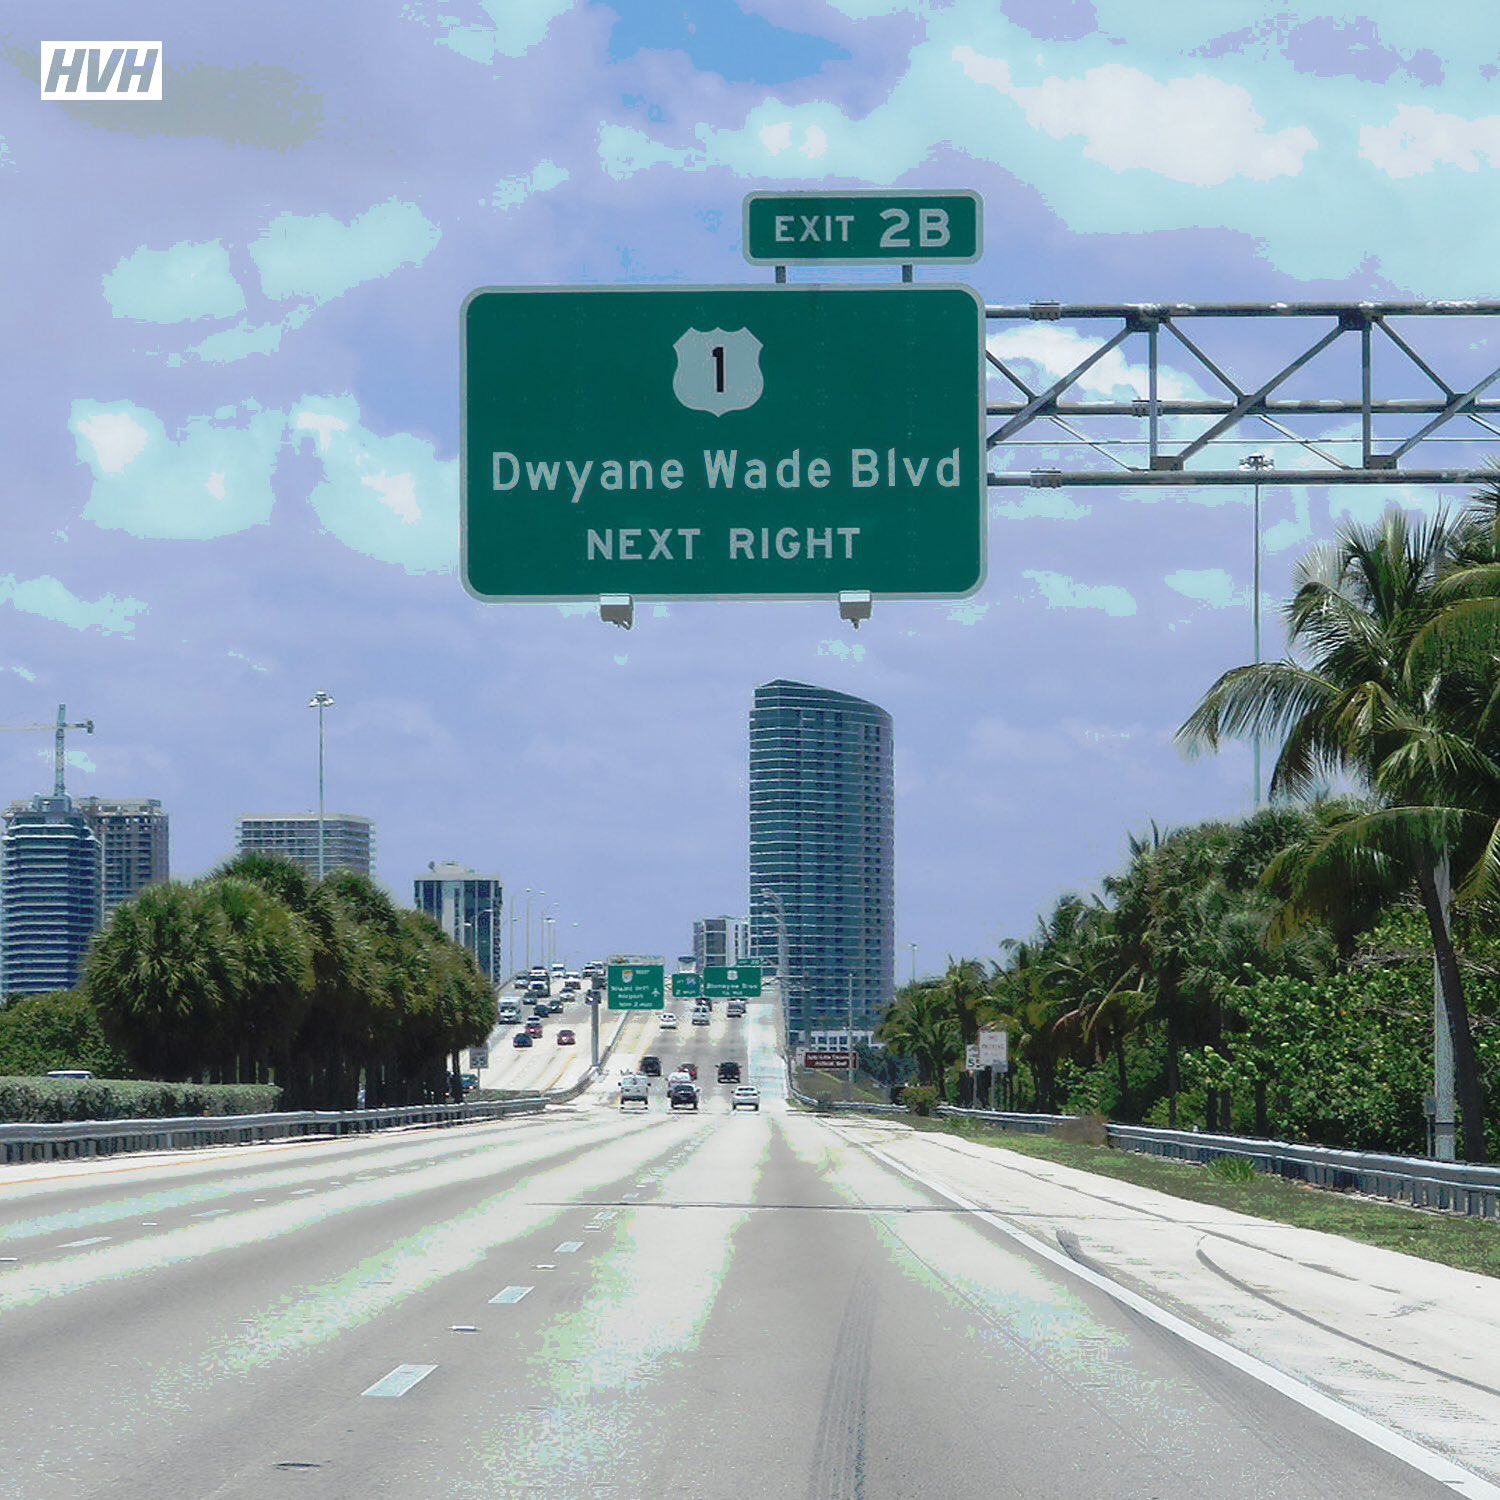 𝙃𝙀𝘼𝙏 𝙉𝘼𝙏𝙄𝙊𝙉 on Twitter: "Brendan Tobin, local radio host, started  a campaign pushing the City of Miami to rename Biscayne Boulevard to Dwyane  Wade Boulevard in honor of the Miami legend. @Brendan_Tobin